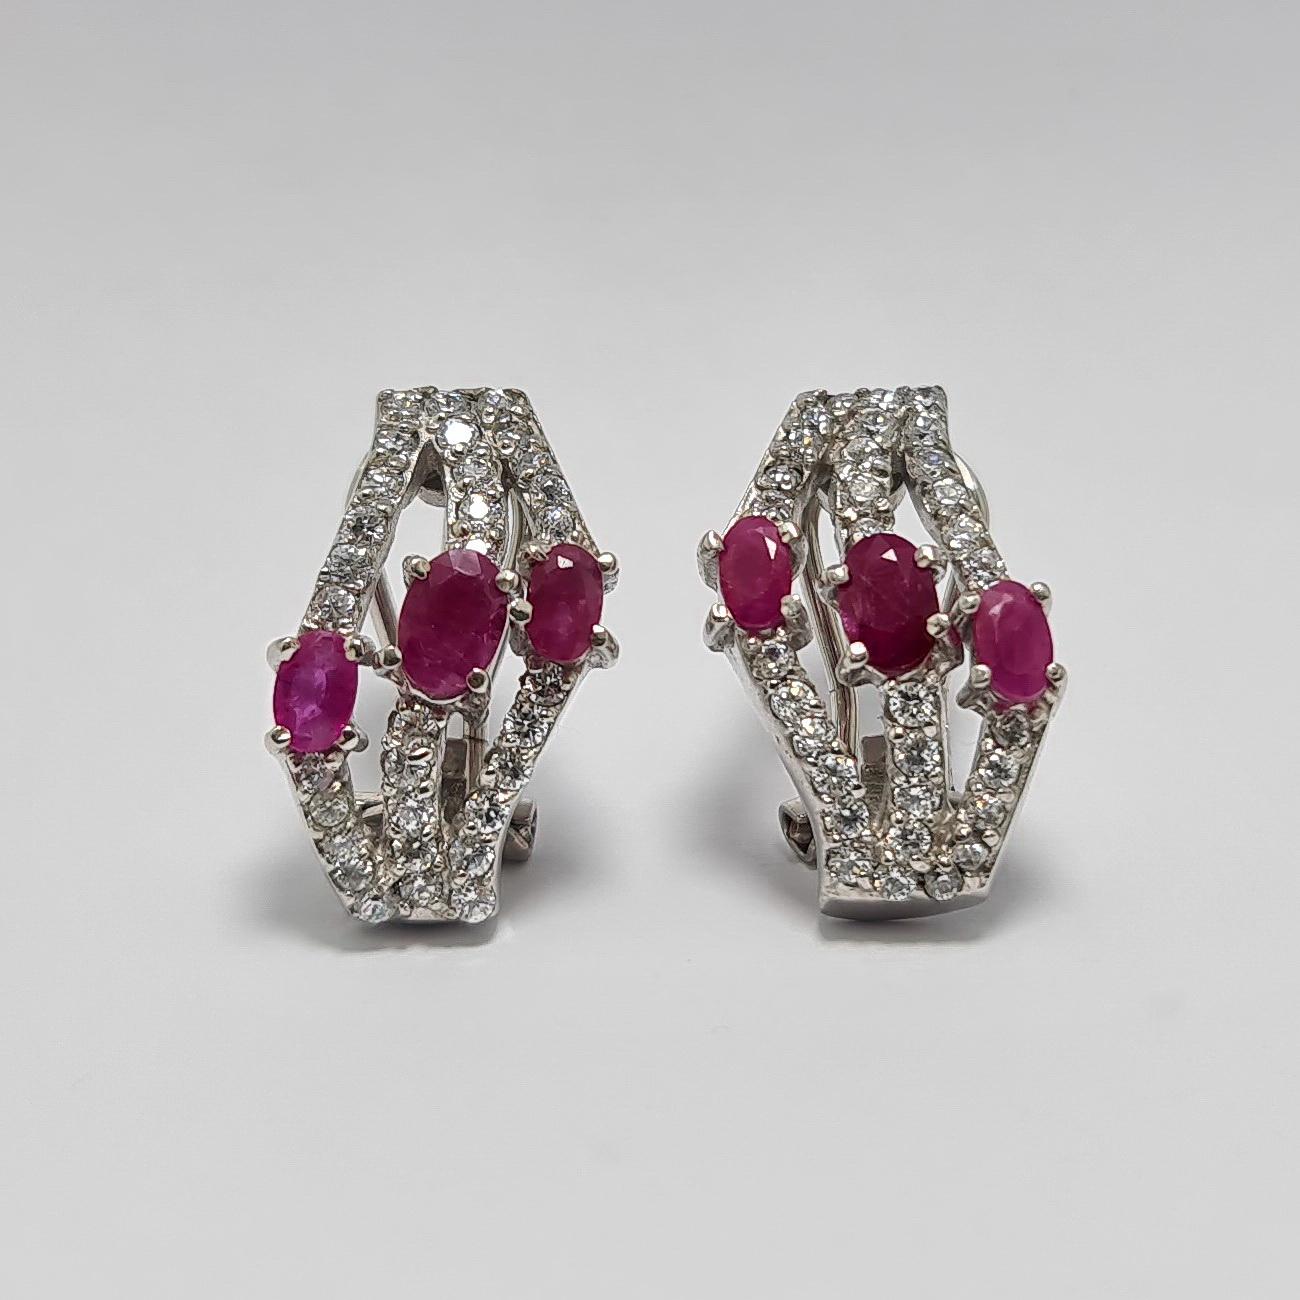 Over 2cts of Natural Untreated Unheated Thai Rubies set in pure .925 Sterling Silver with Rhodium Plated Earrings with Cubic Zirconia 